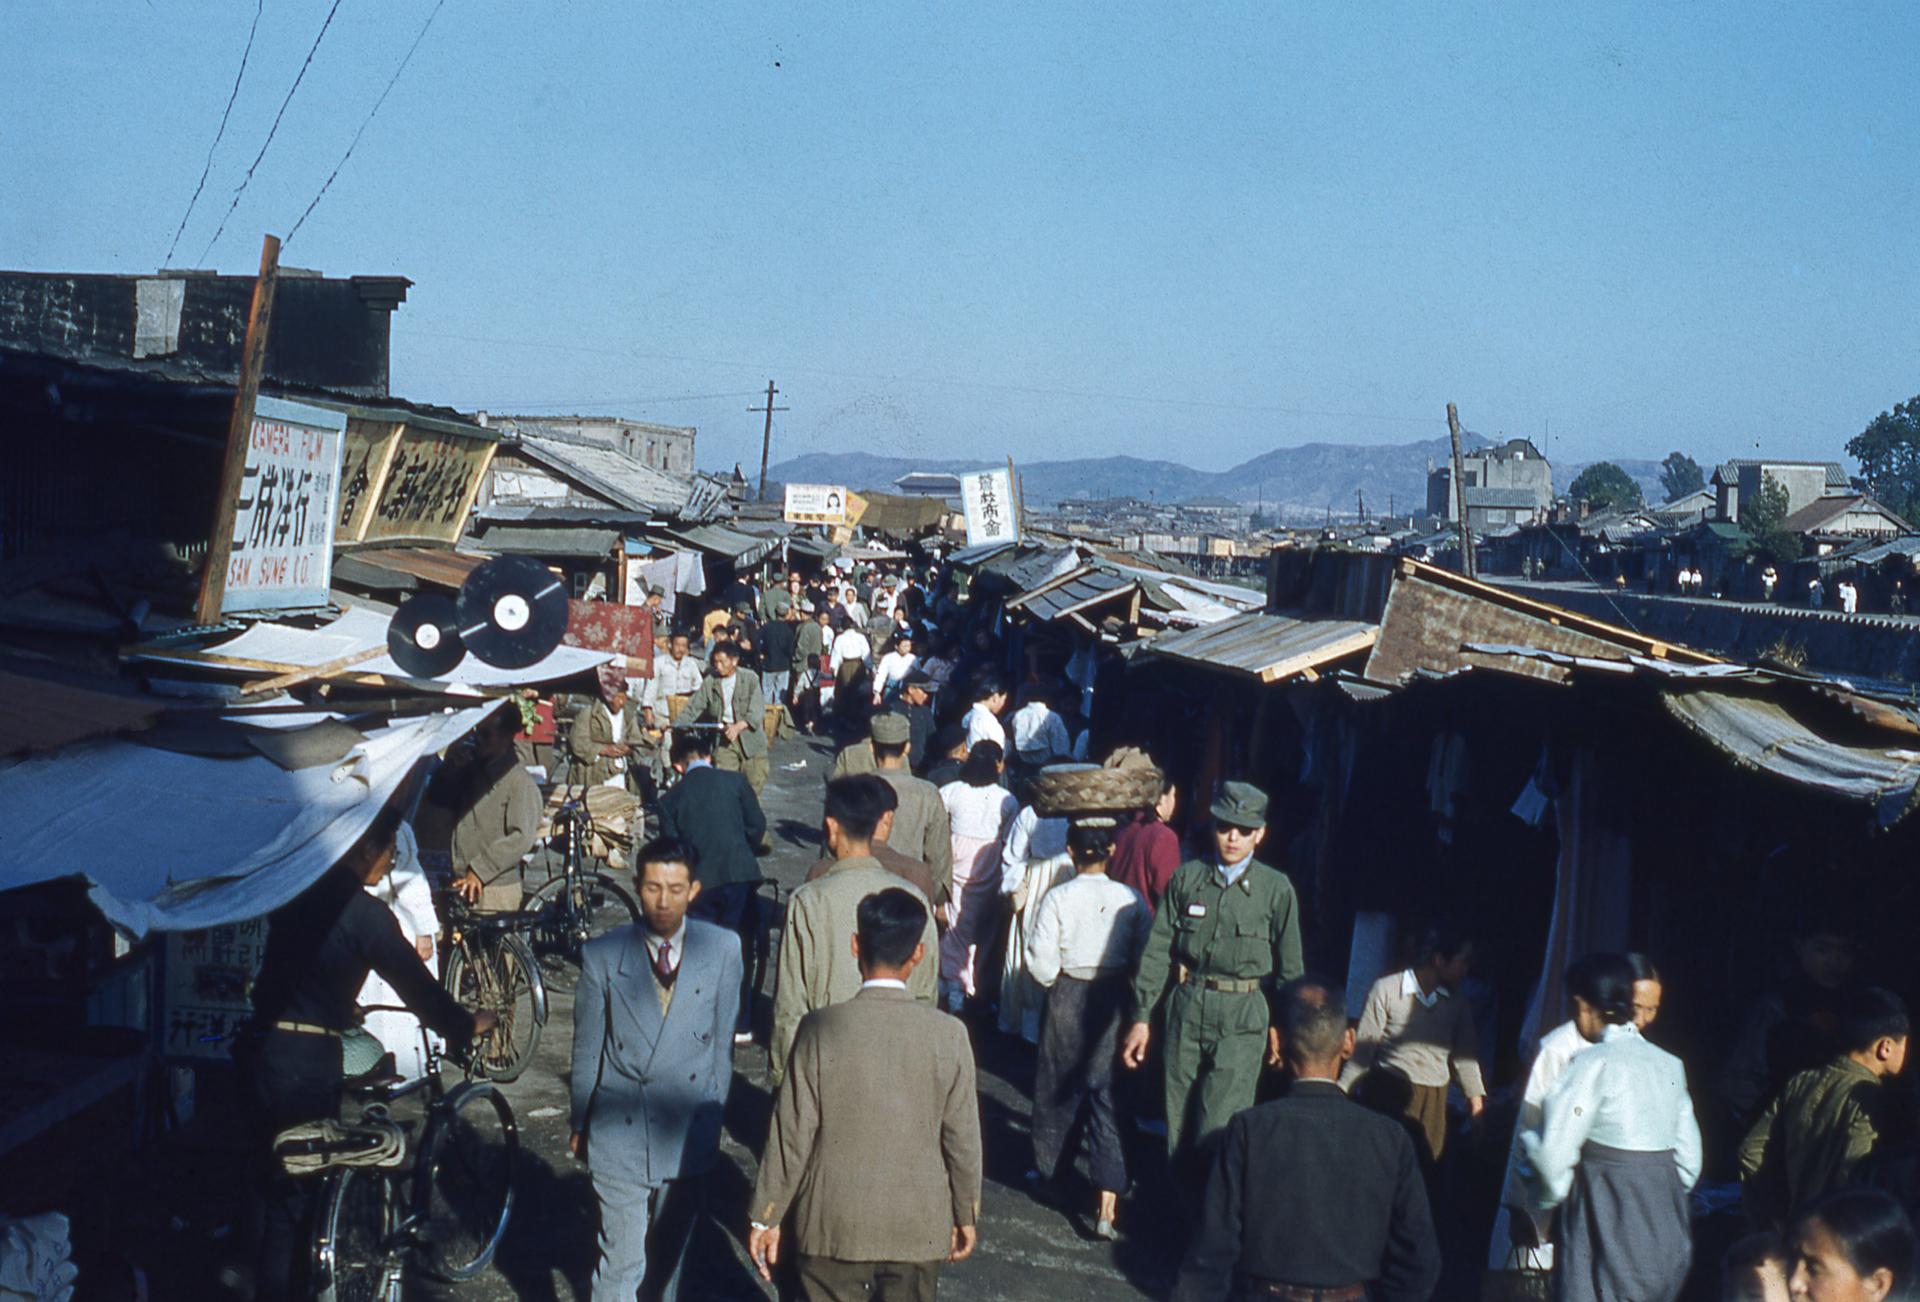 a market in Seoul, South Korea, in the 1950s